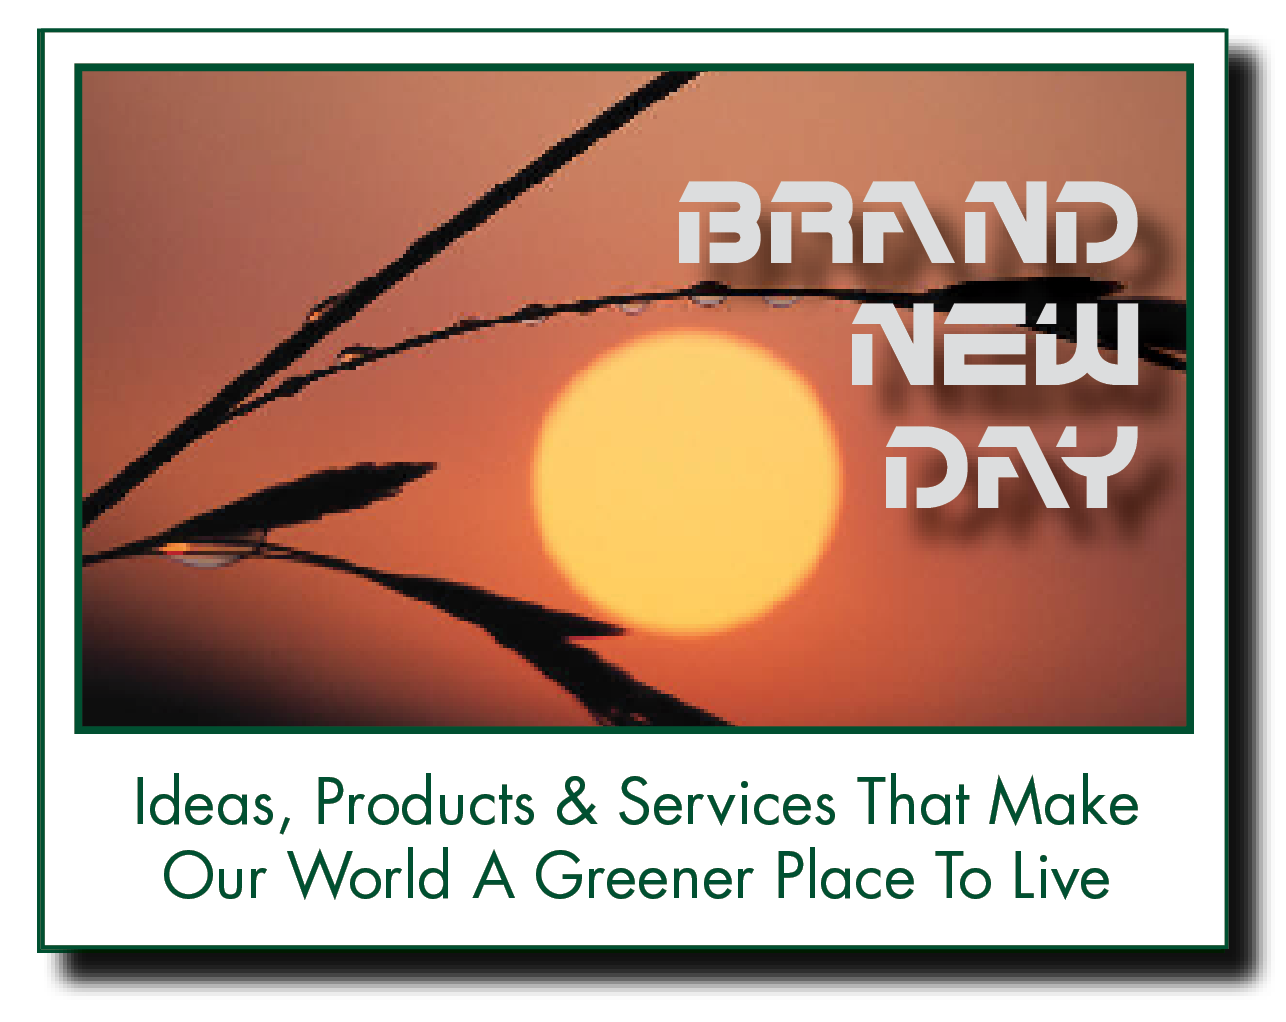 BRAND
TTT
ny

Ideas, Products & Services That Make
Our World A Greener Place To Live